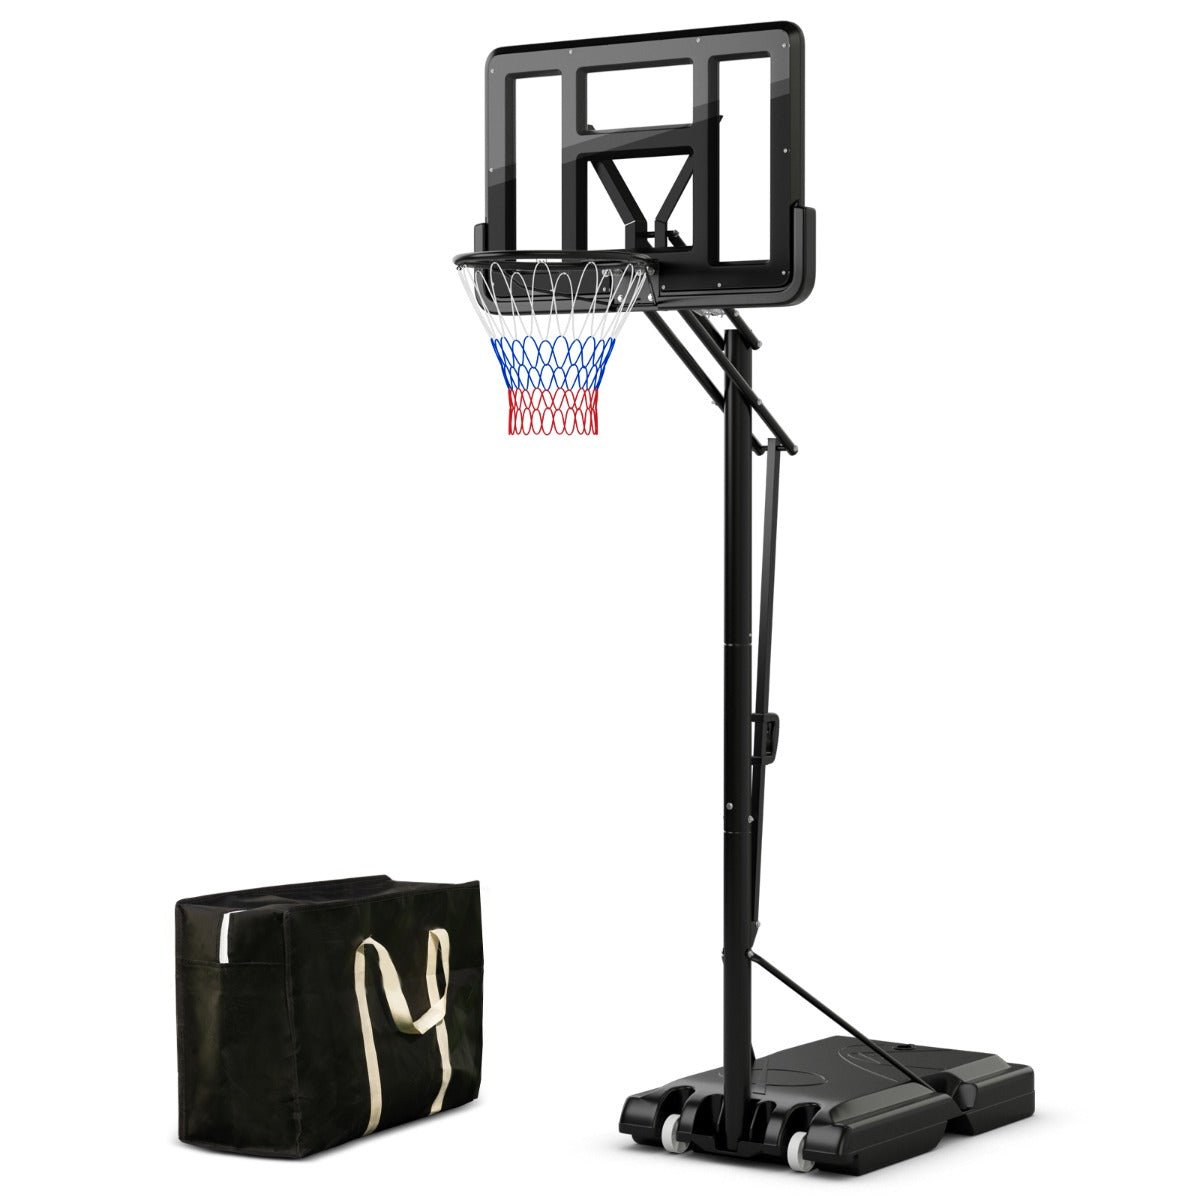 5-Level Height Adjustable Basketball Hoop Stand with Backboard for Exercise